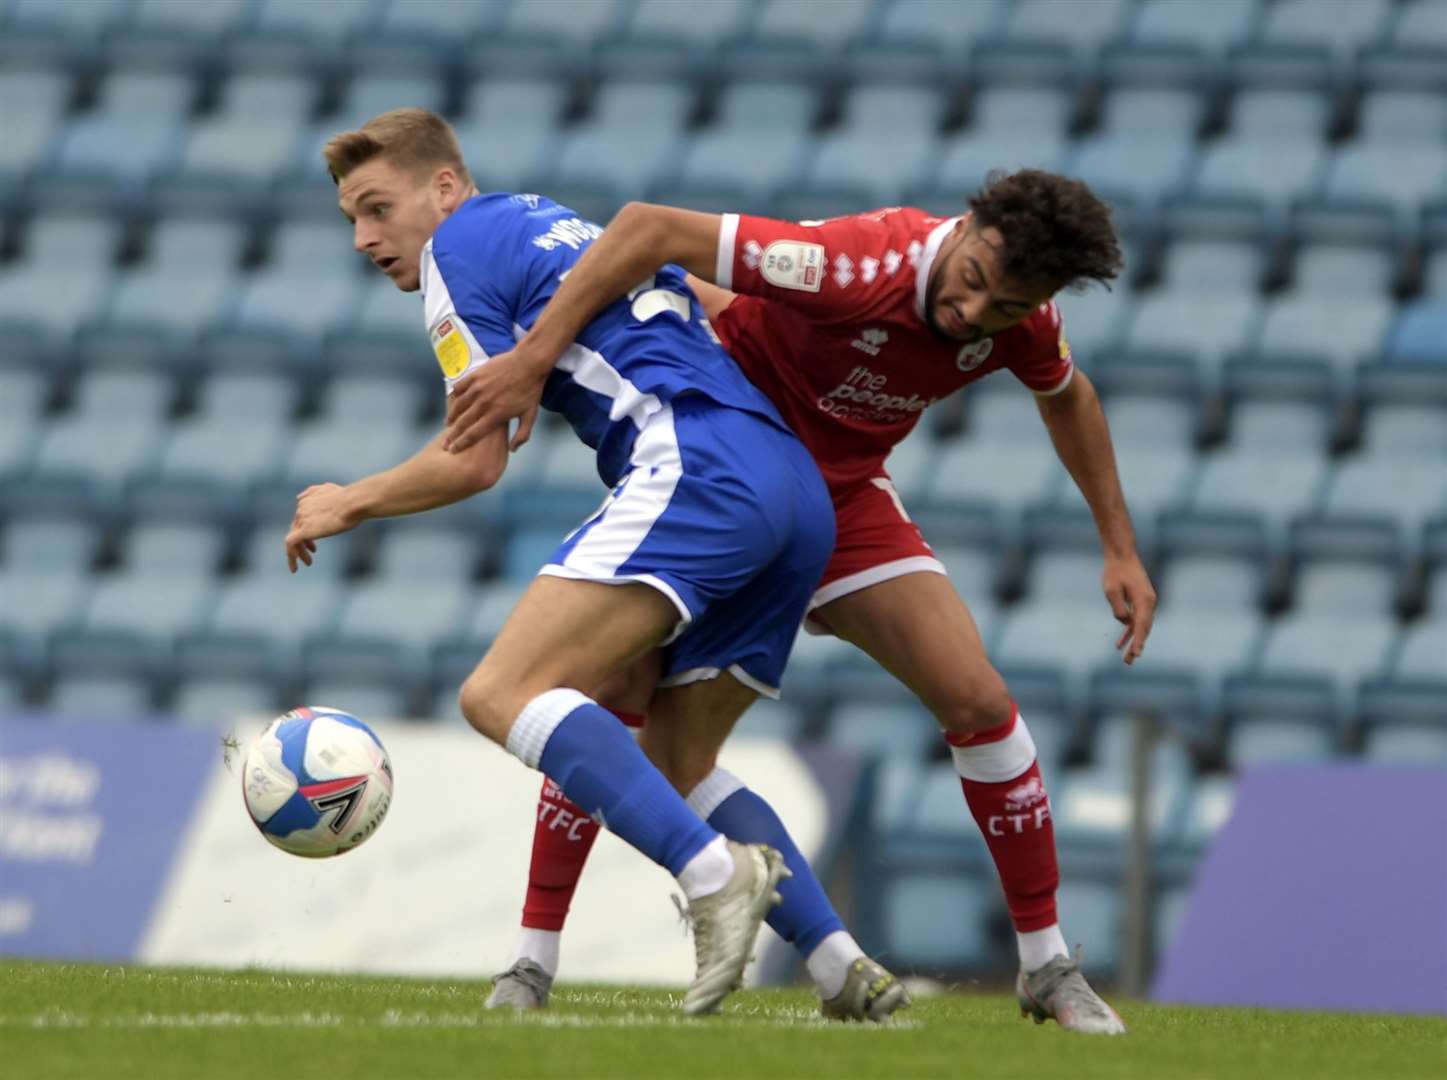 Henry Woods in action against Crawley Town in Gillingham's first EFL Trophy match